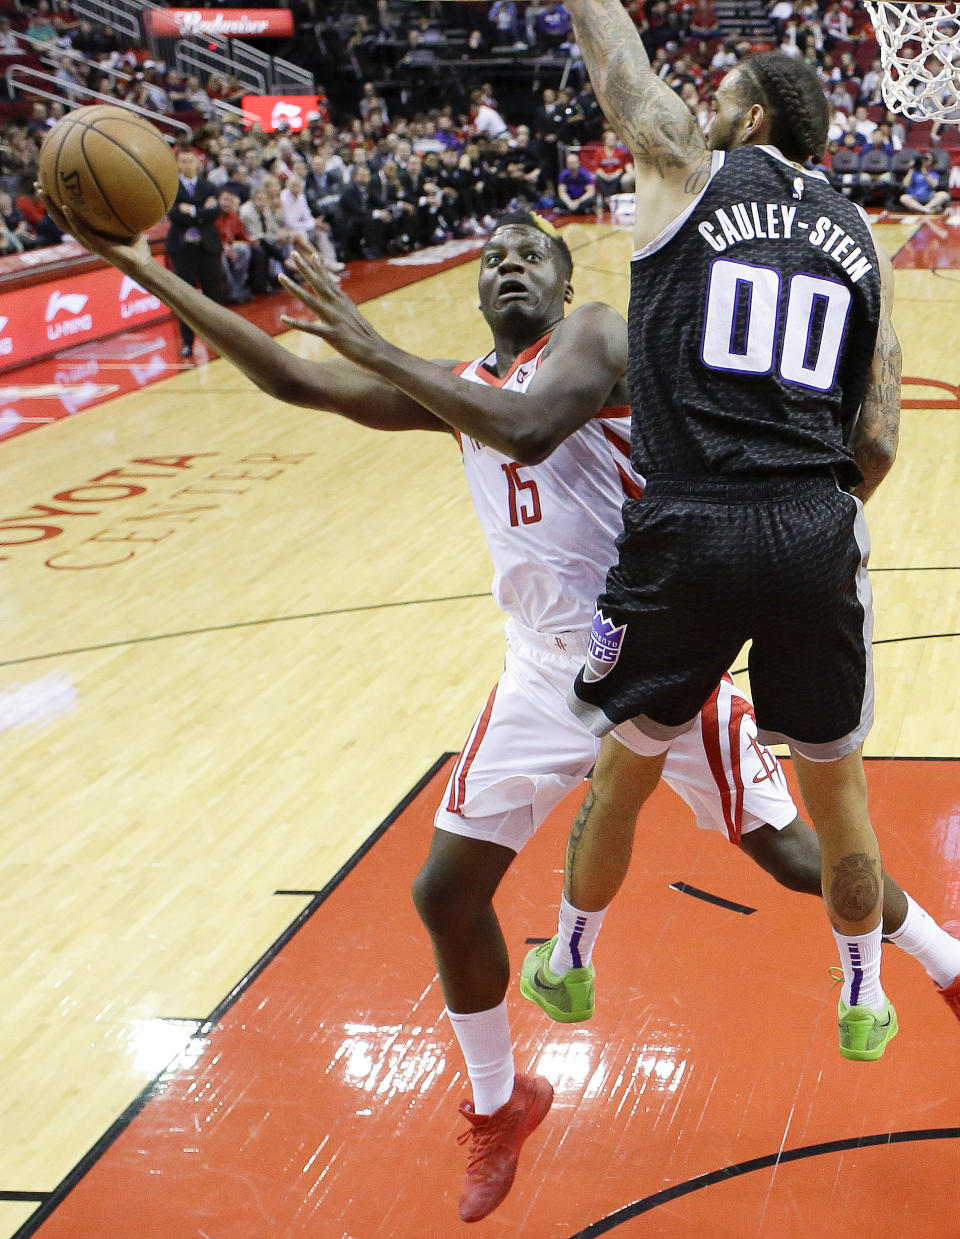 Houston Rockets center Clint Capela, left, shoots as Sacramento Kings center Willie Cauley-Stein defends during the first half of an NBA basketball game, Saturday, March 30, 2019, in Houston. (AP Photo/Eric Christian Smith)